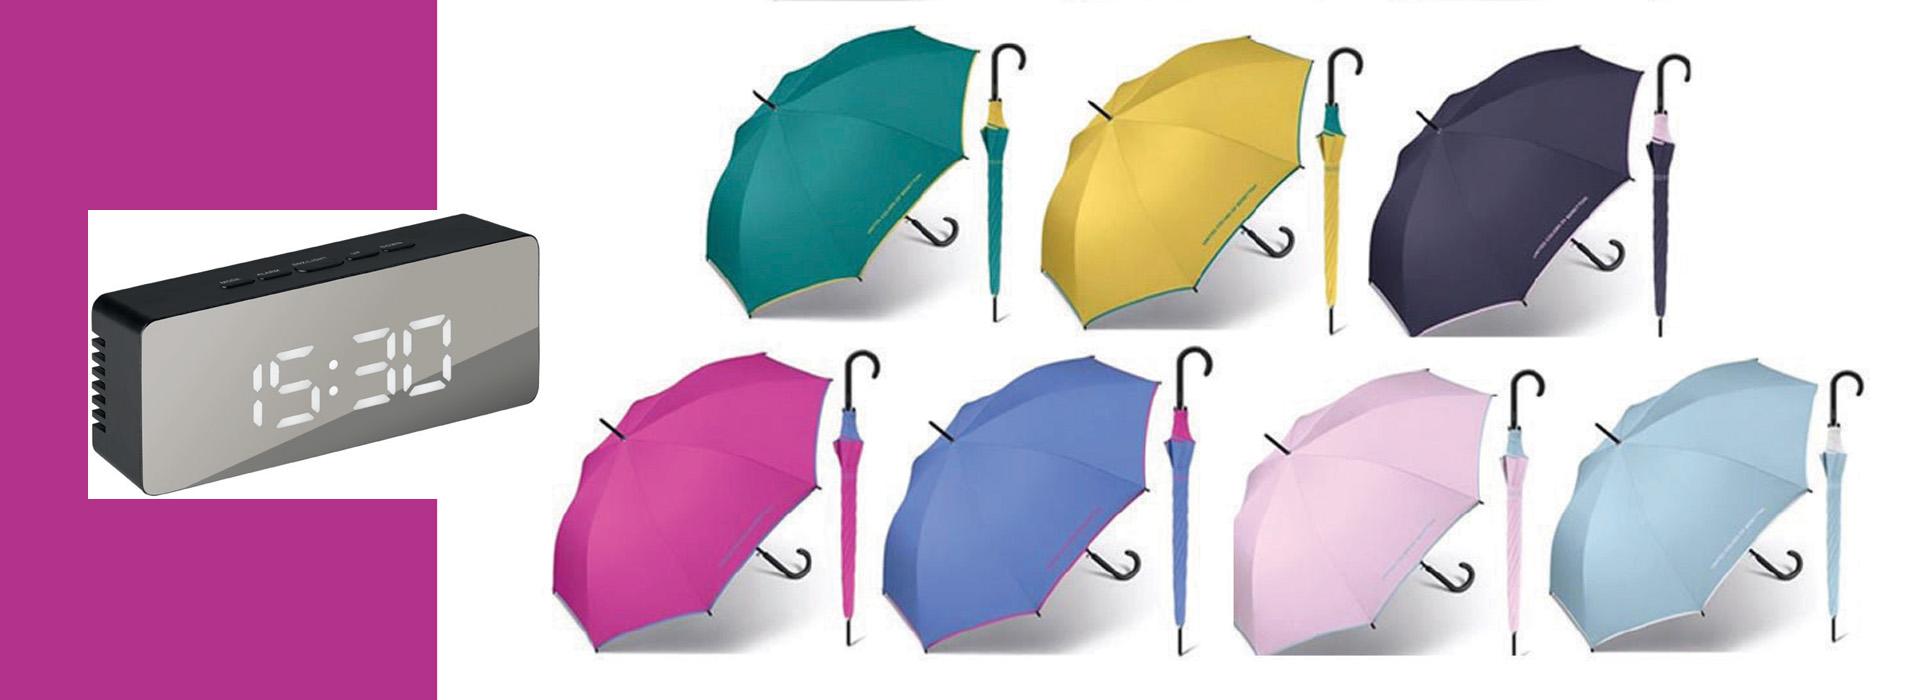 Print-on-Demand Accessories, Umbrellas and Gift Sets